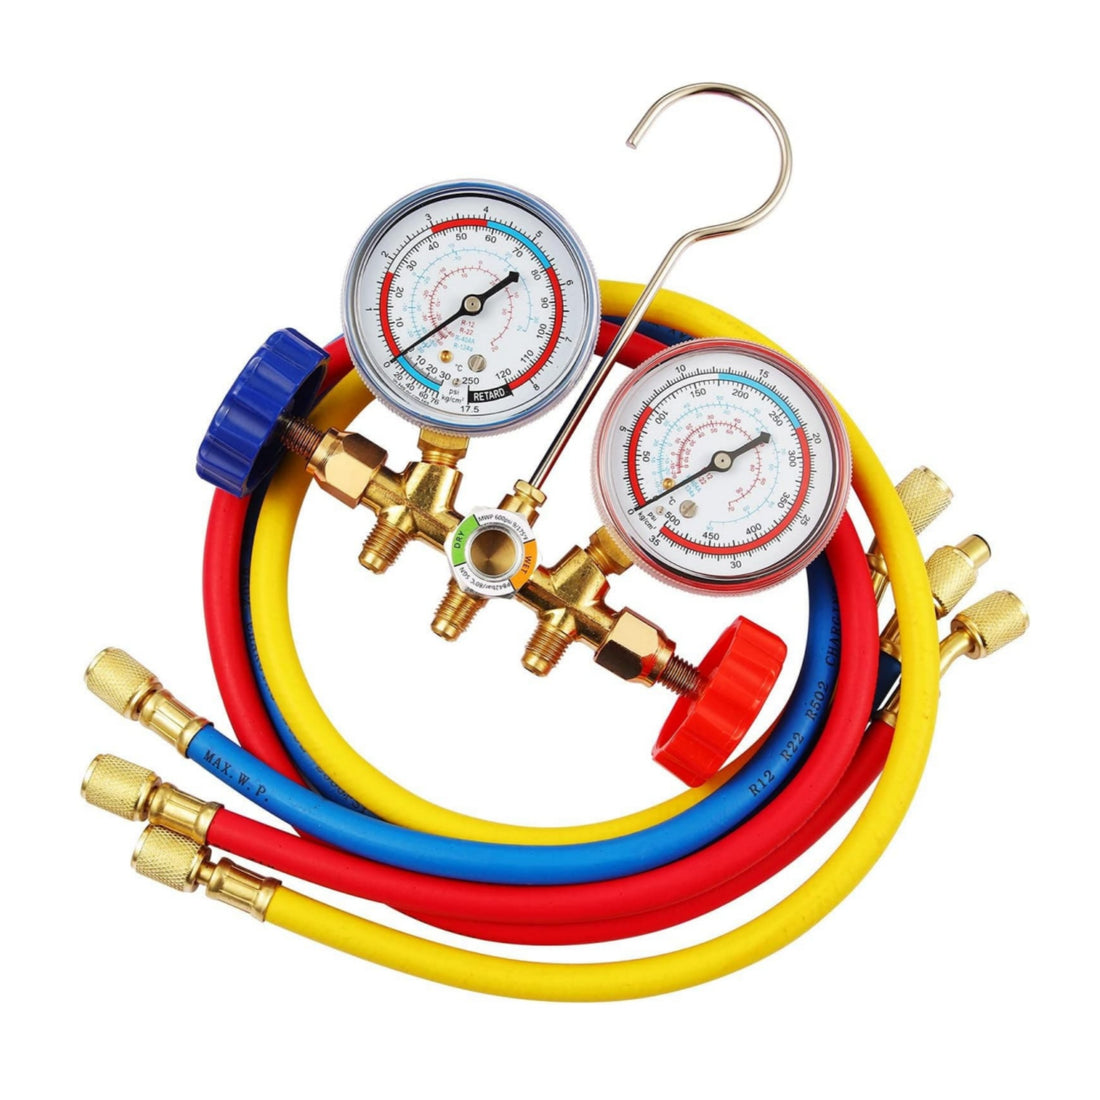 R134A Manifold Gauge Set, AC Recharge Kit Manifold Diagnostic Gauge Fit R134A, R22, R410 Refrigerant with 3Ft Charging Hoses for Home Car Refrigeration Charging Service(250Psi-500Psi)